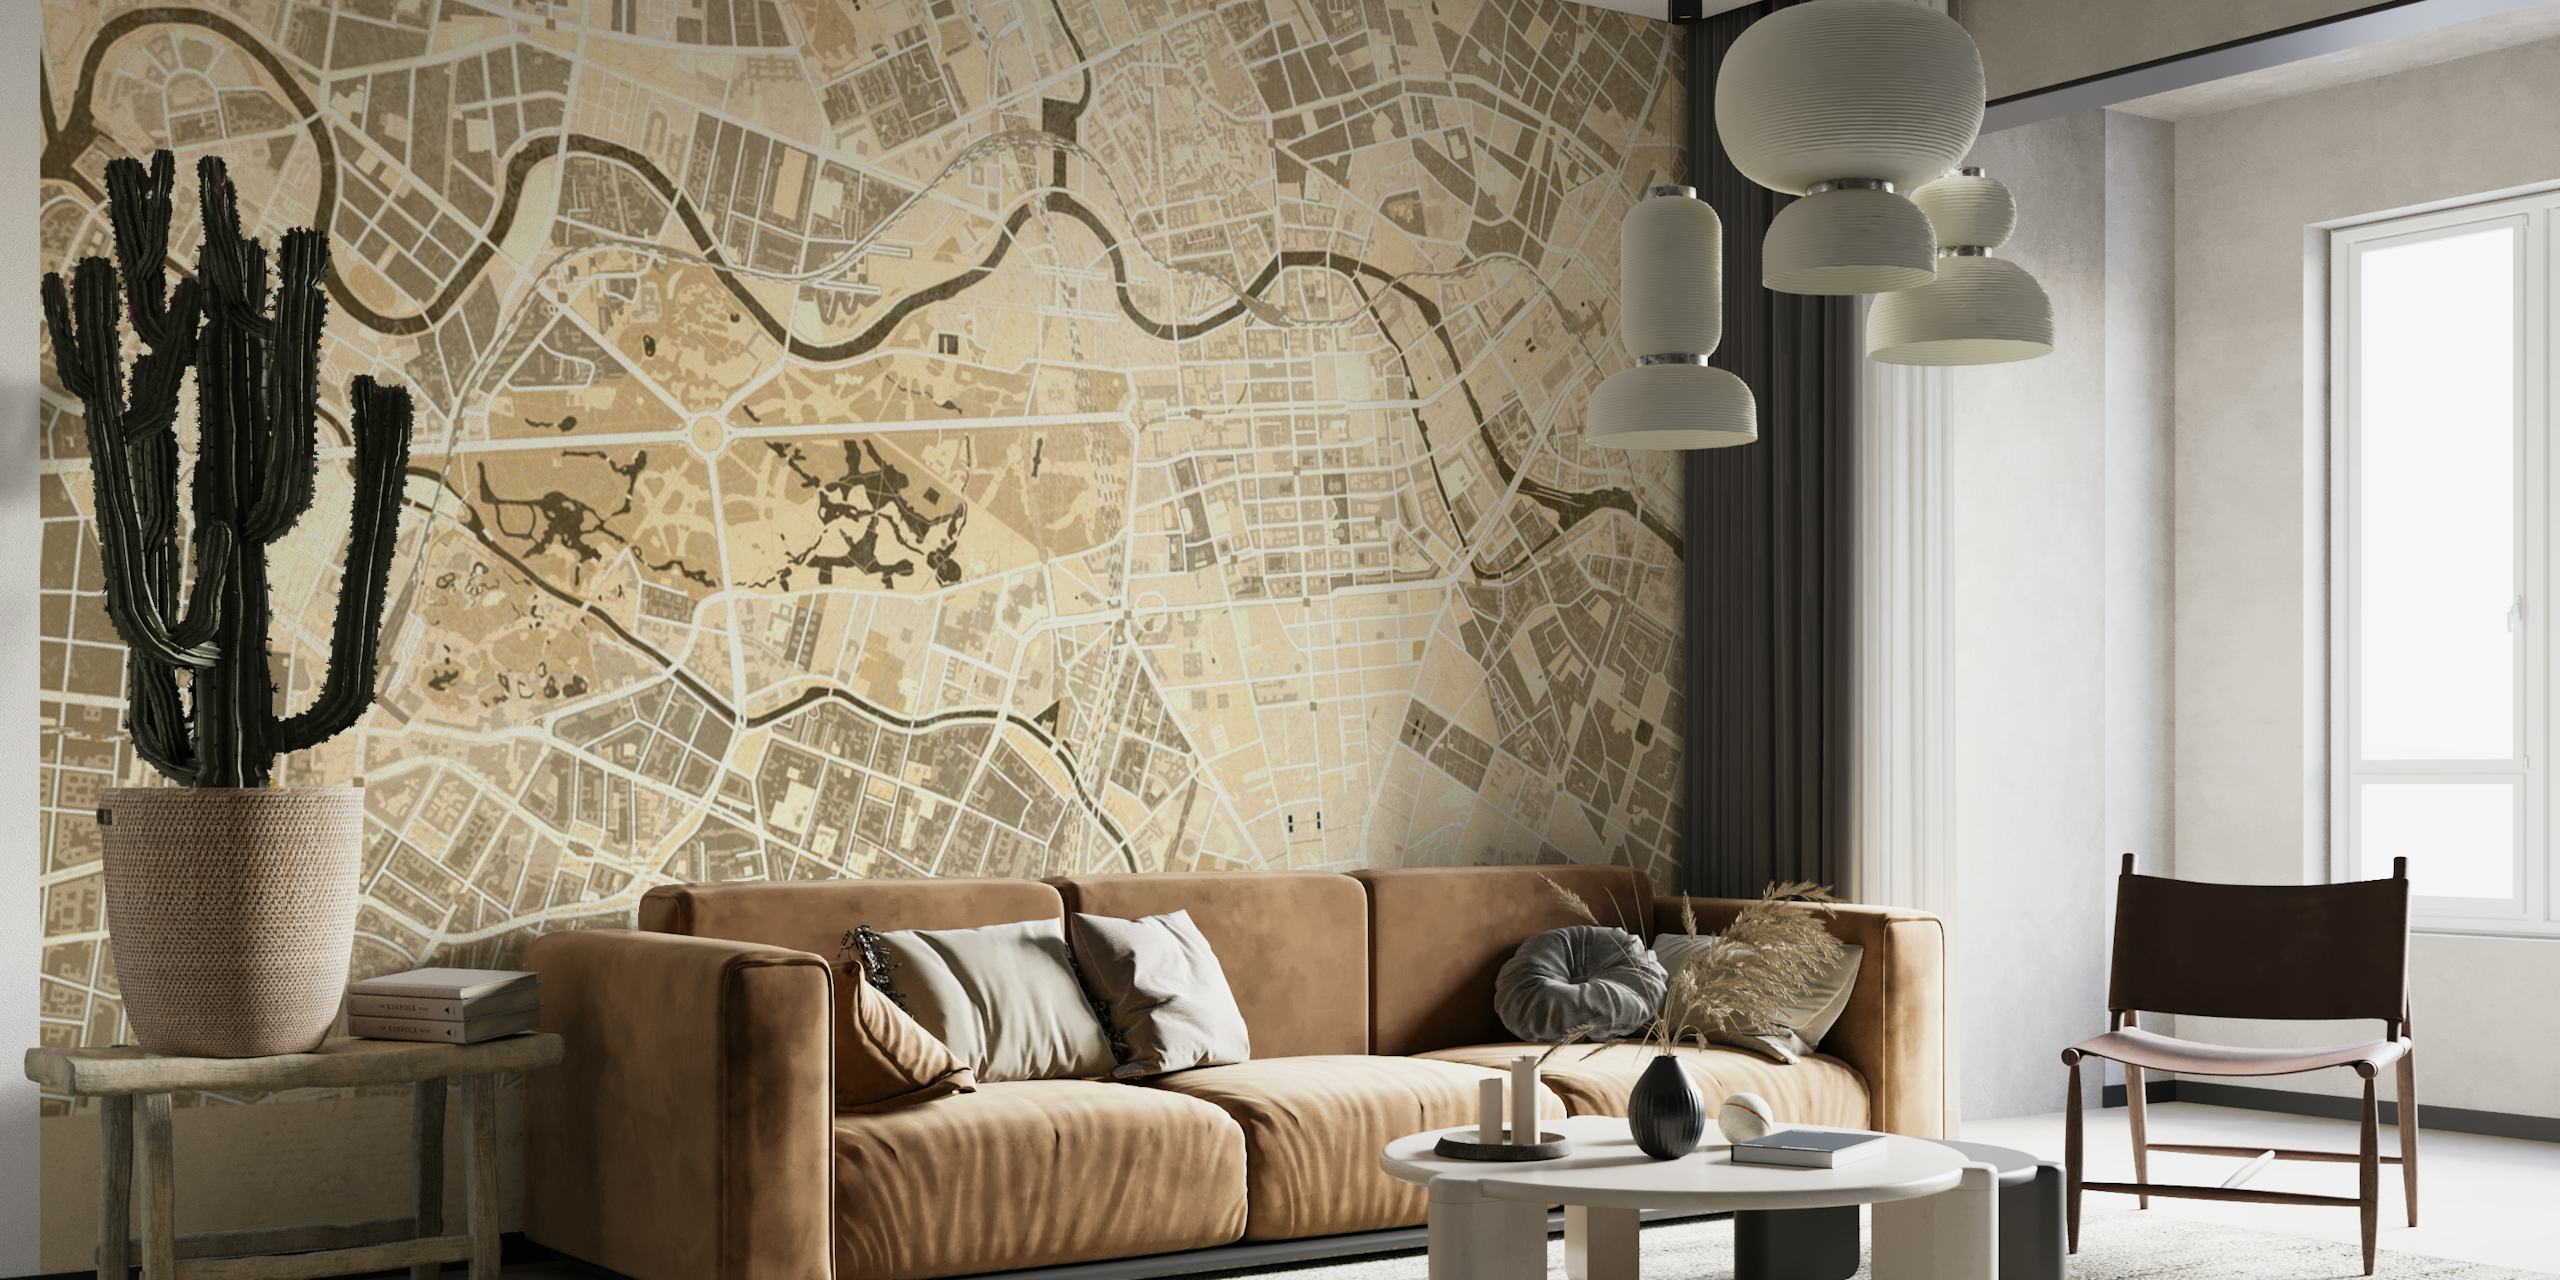 Sepia-toned vintage map of Berlin wall mural